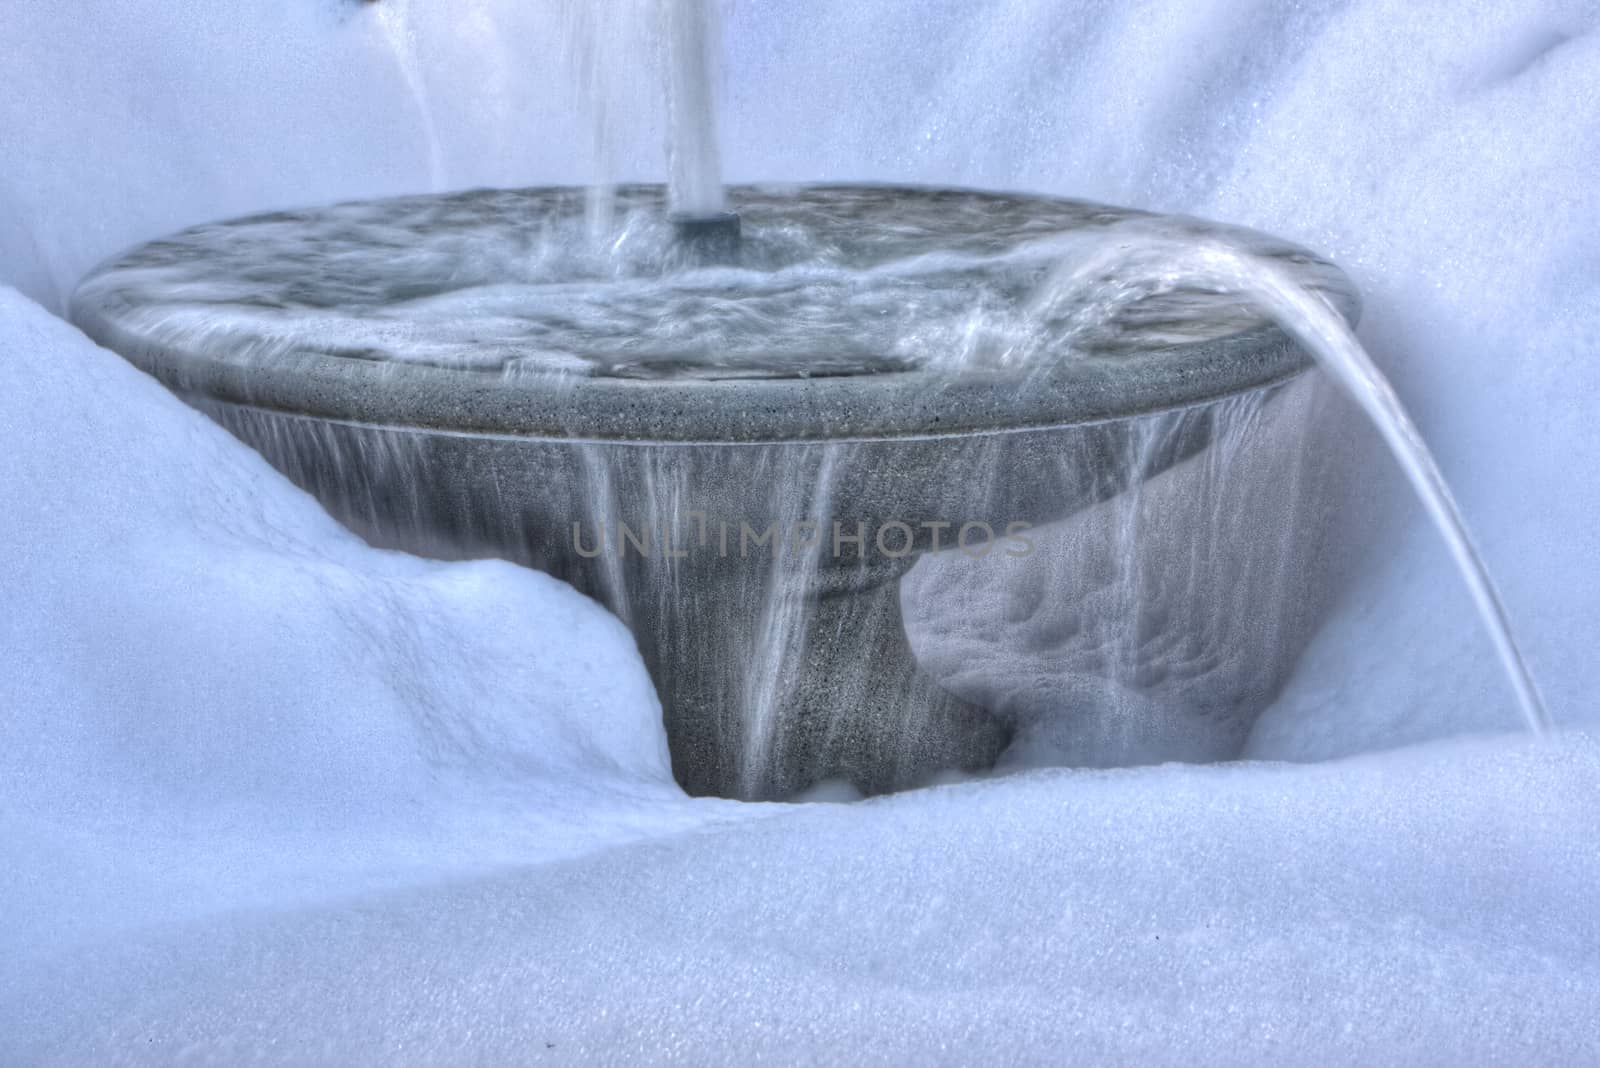 Water Fountain creating suds in High Dynamic Range